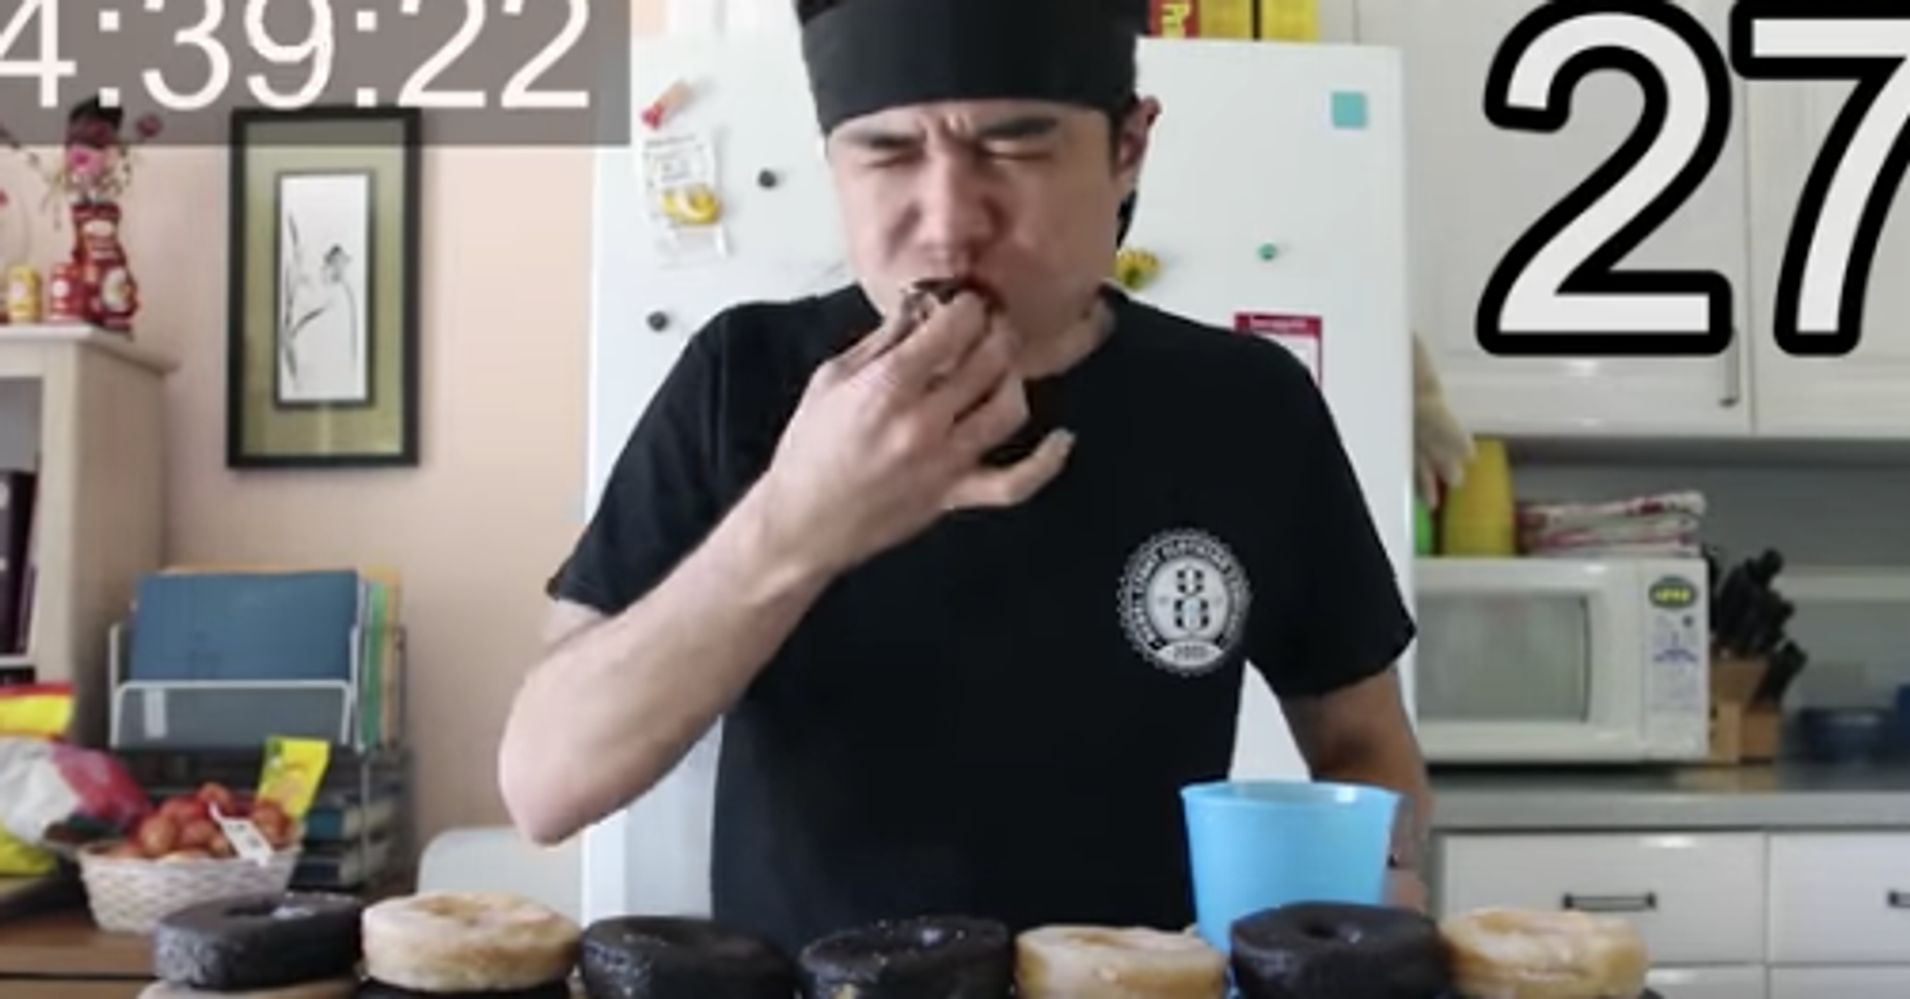 Watch A Guy Eat 50 Doughnuts And Get That Glazed Look Huffpost